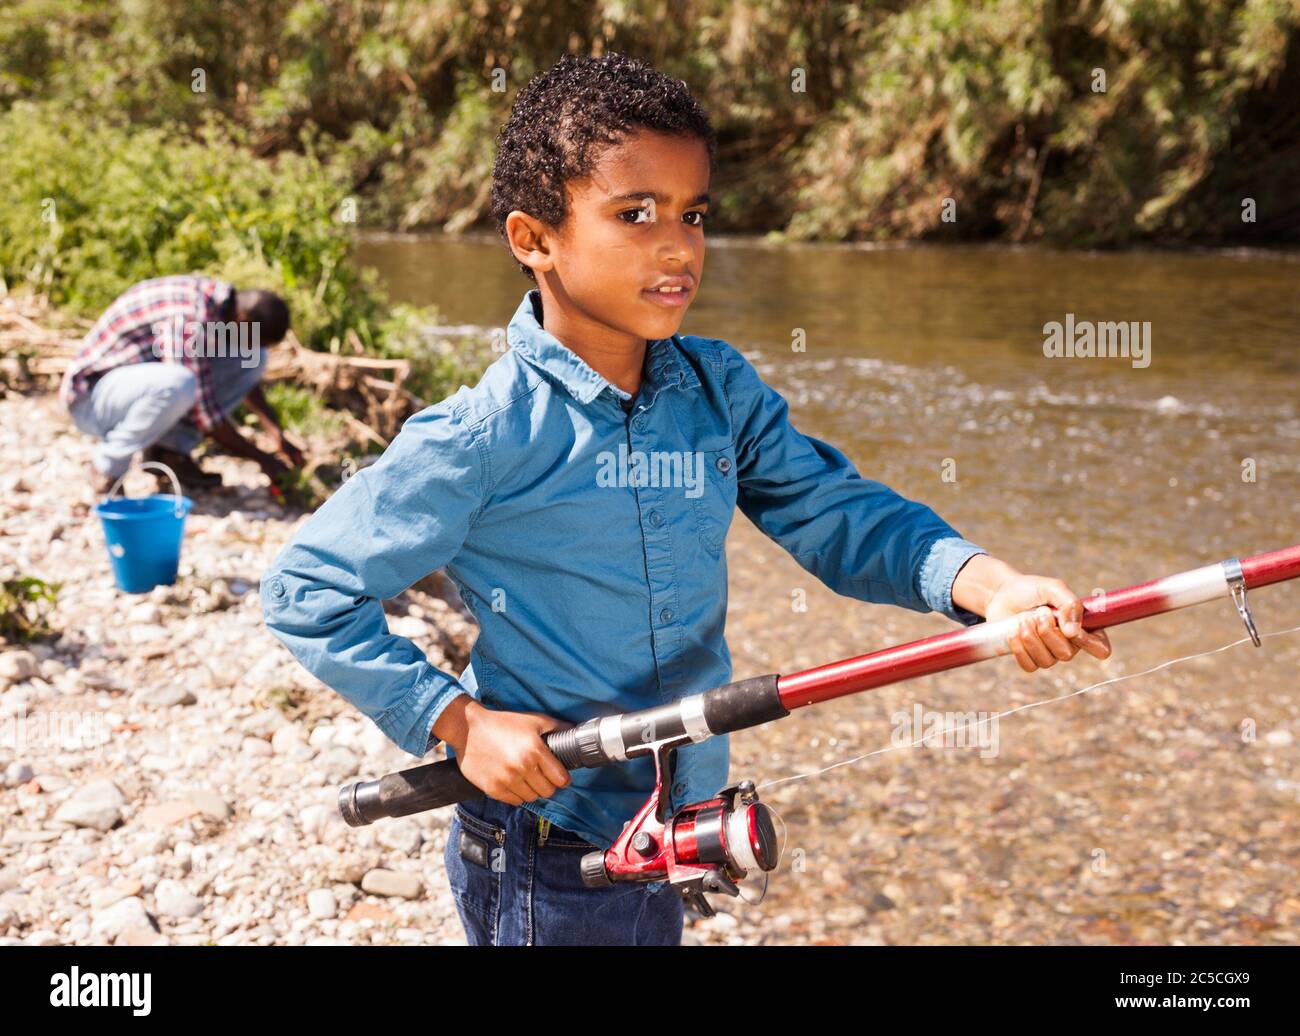 Little African boy fishing with his father and pulling fish Stock Photo